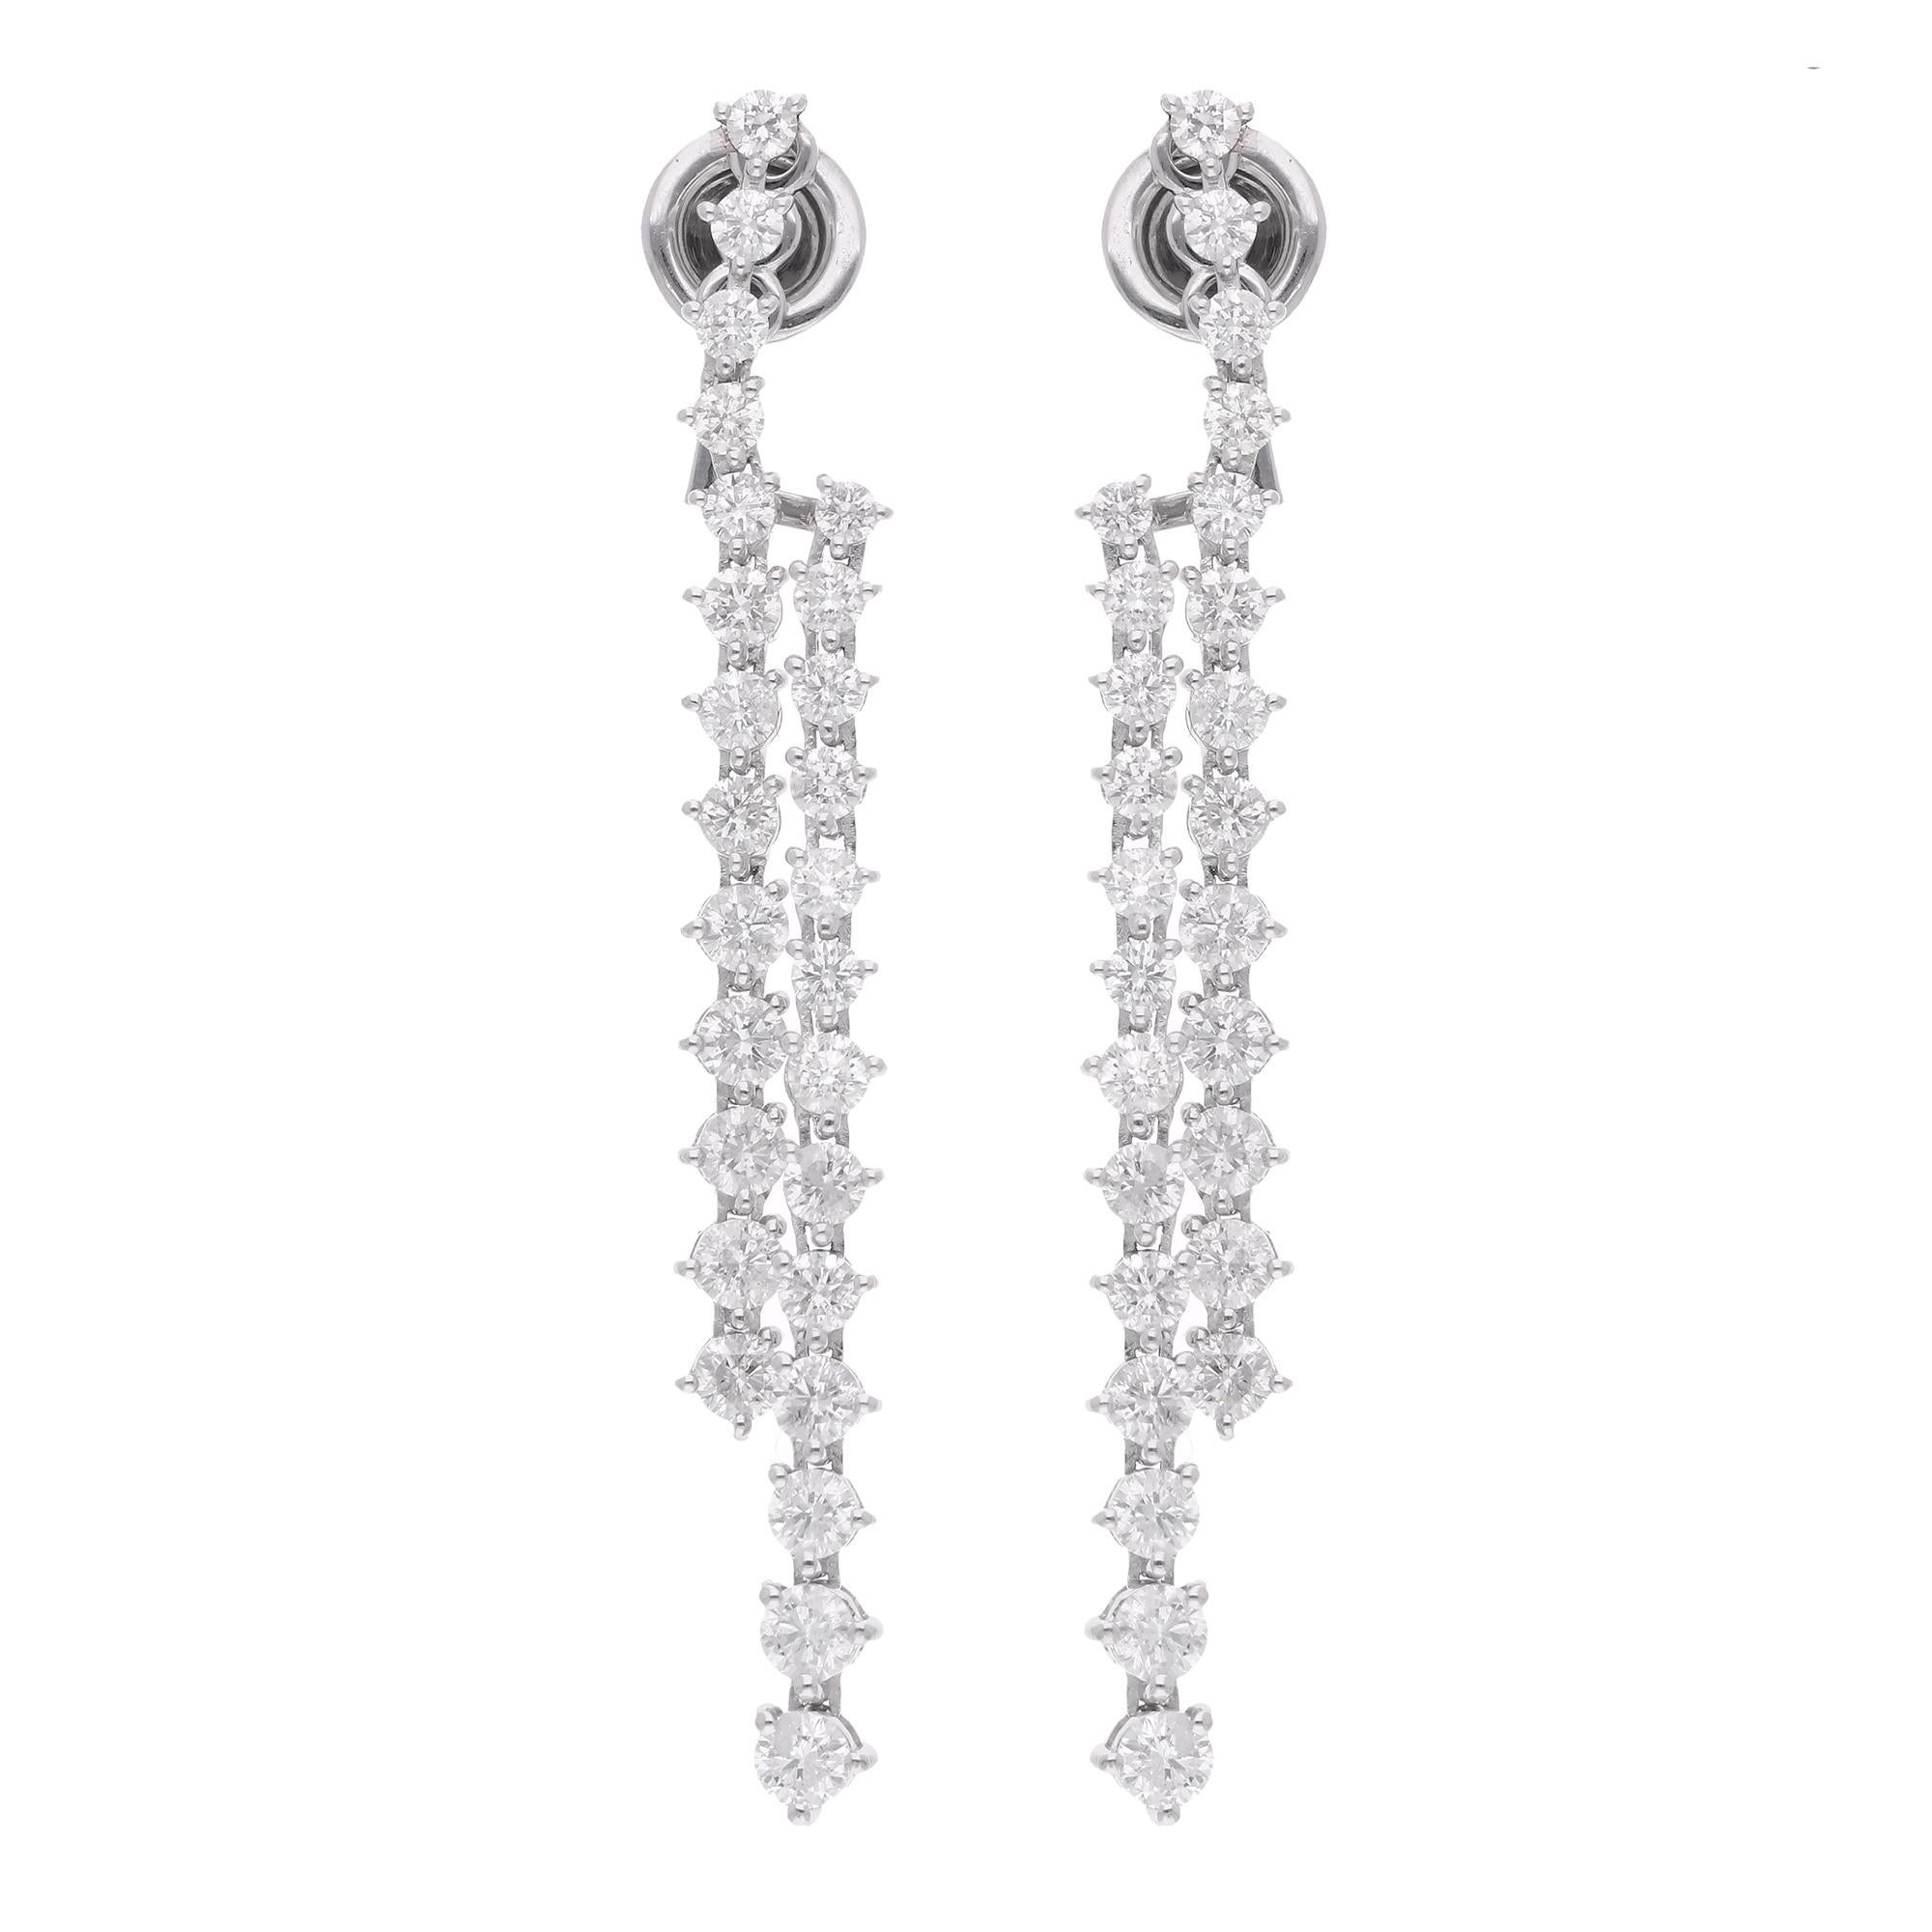 Modern 3.48 Carat SI Clarity HI Color Diamond Jacket Earrings 18kt White Gold Jewelry For Sale